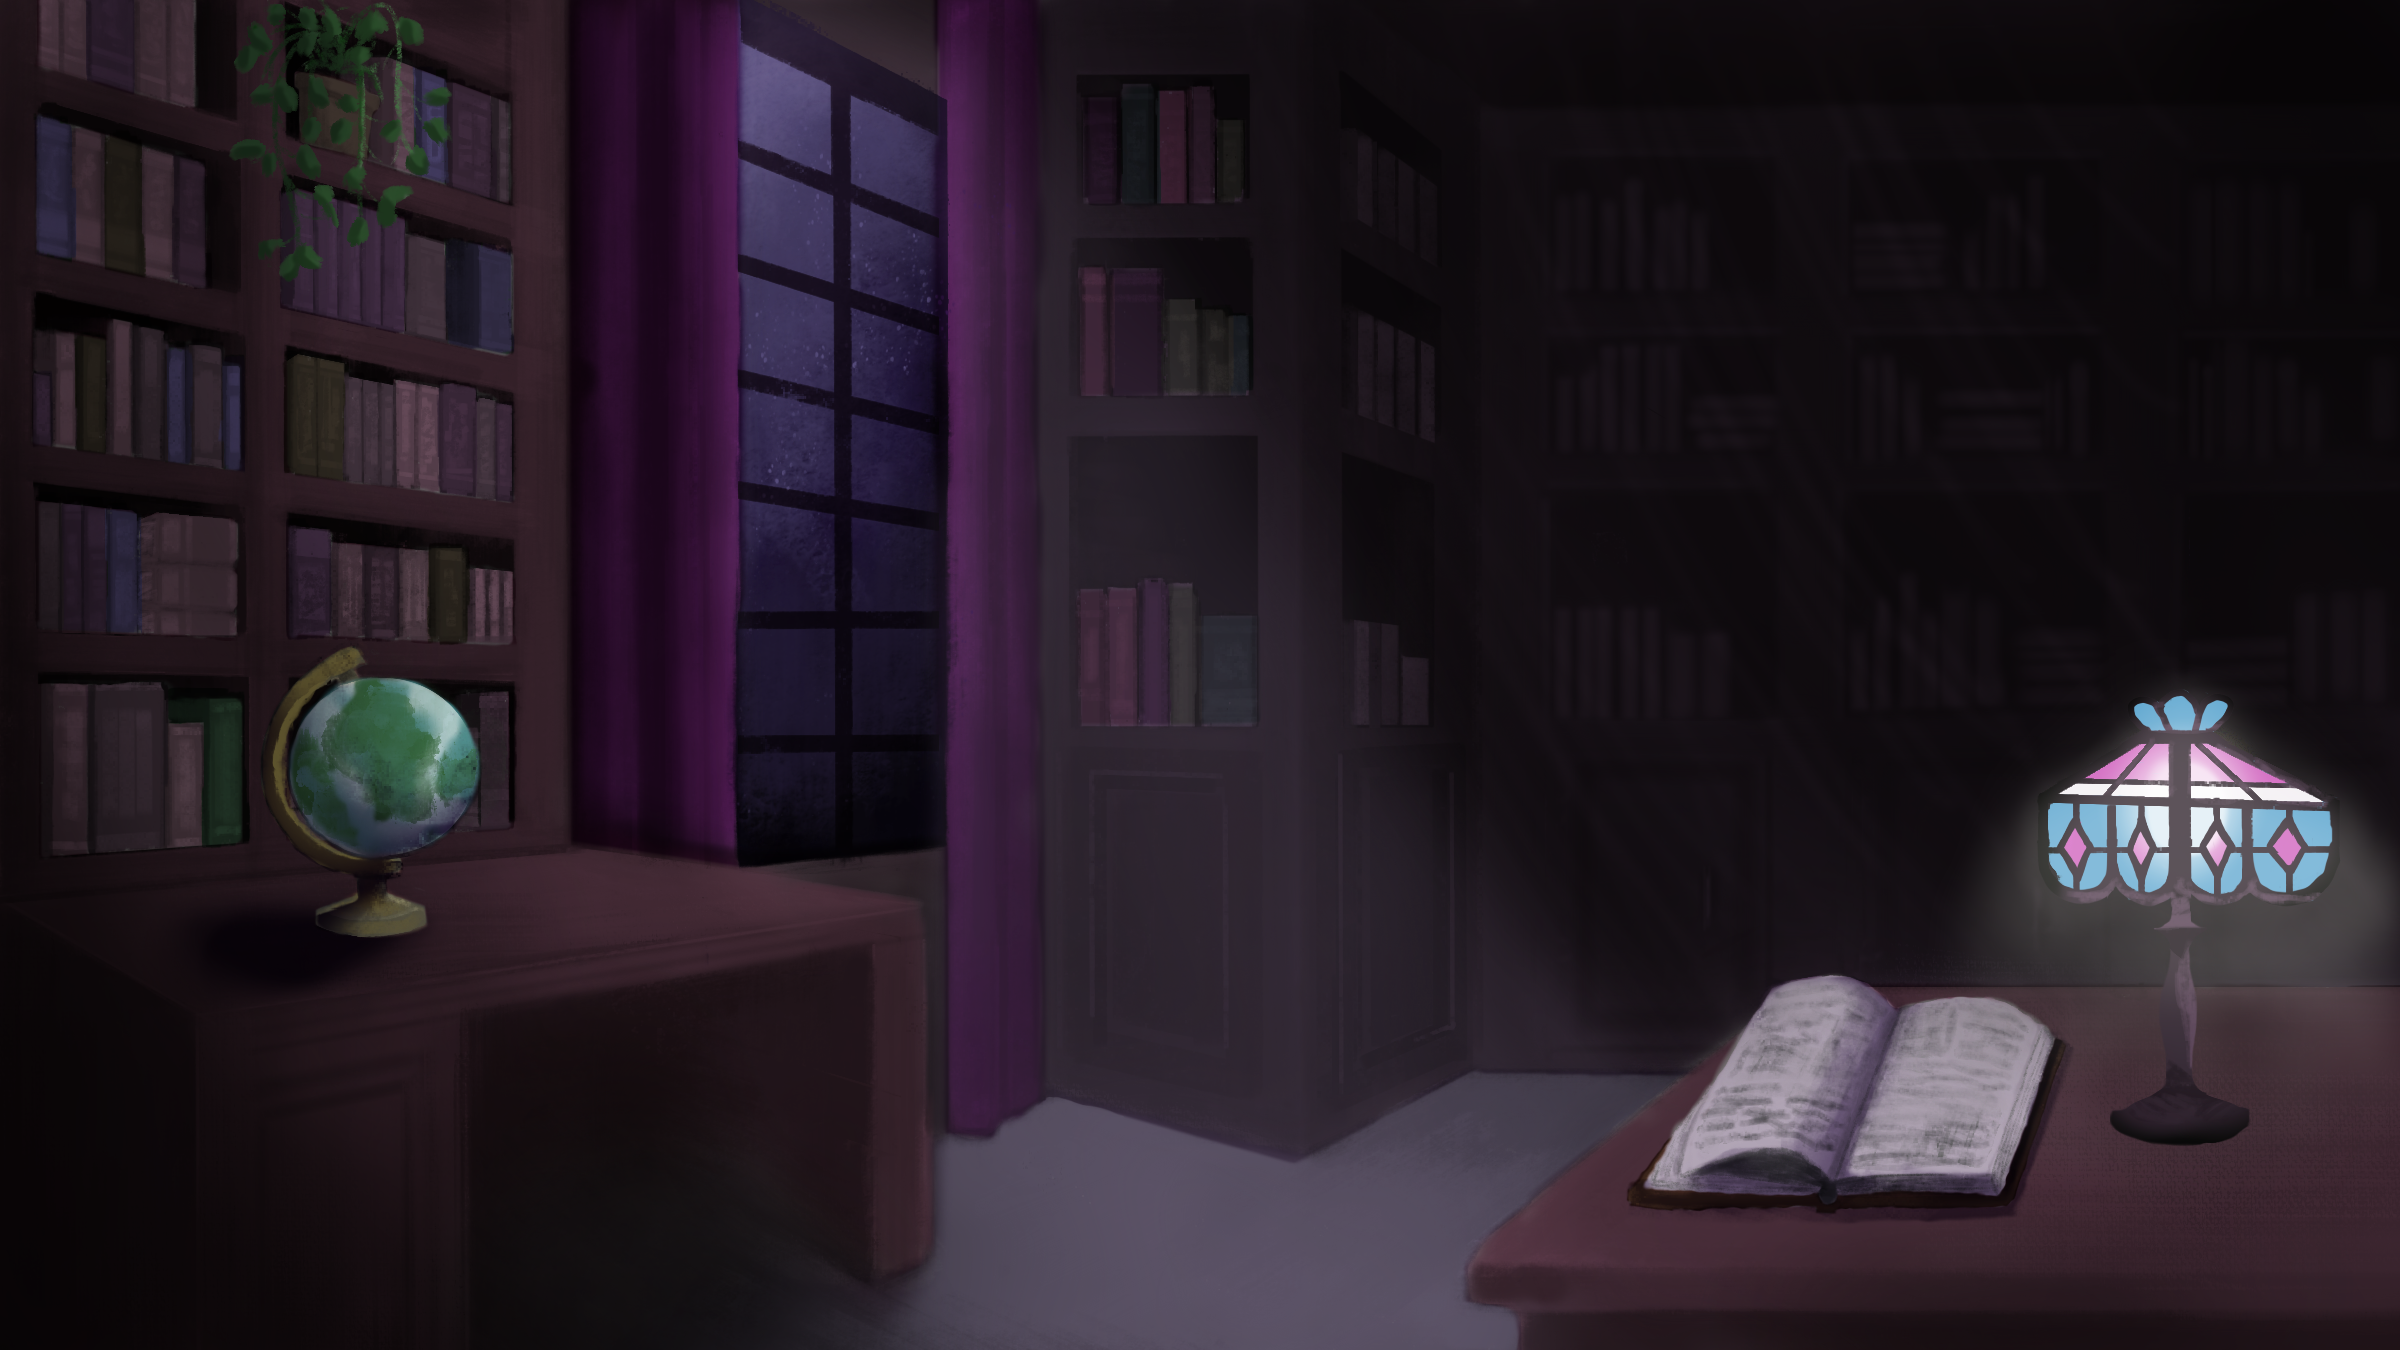 Art of a library. The library is dark and lovely, with purple curtains, a globe, a book, and an ornate lamp.